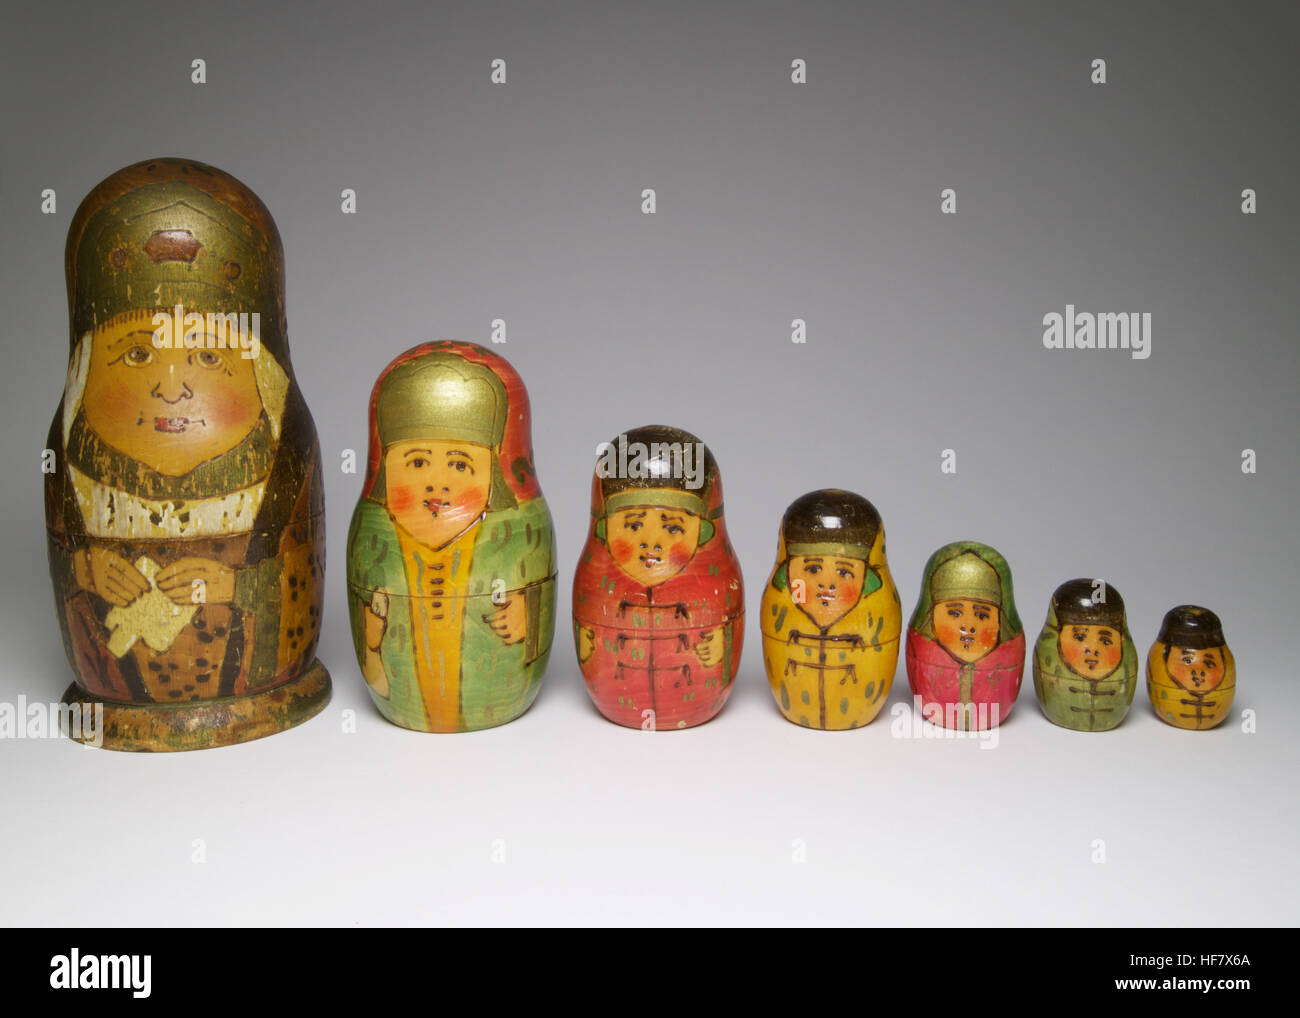 Set of 7 vintage Russian poker work and painted wooden dolls. The largest doll measures 18.5cm high Stock Photo